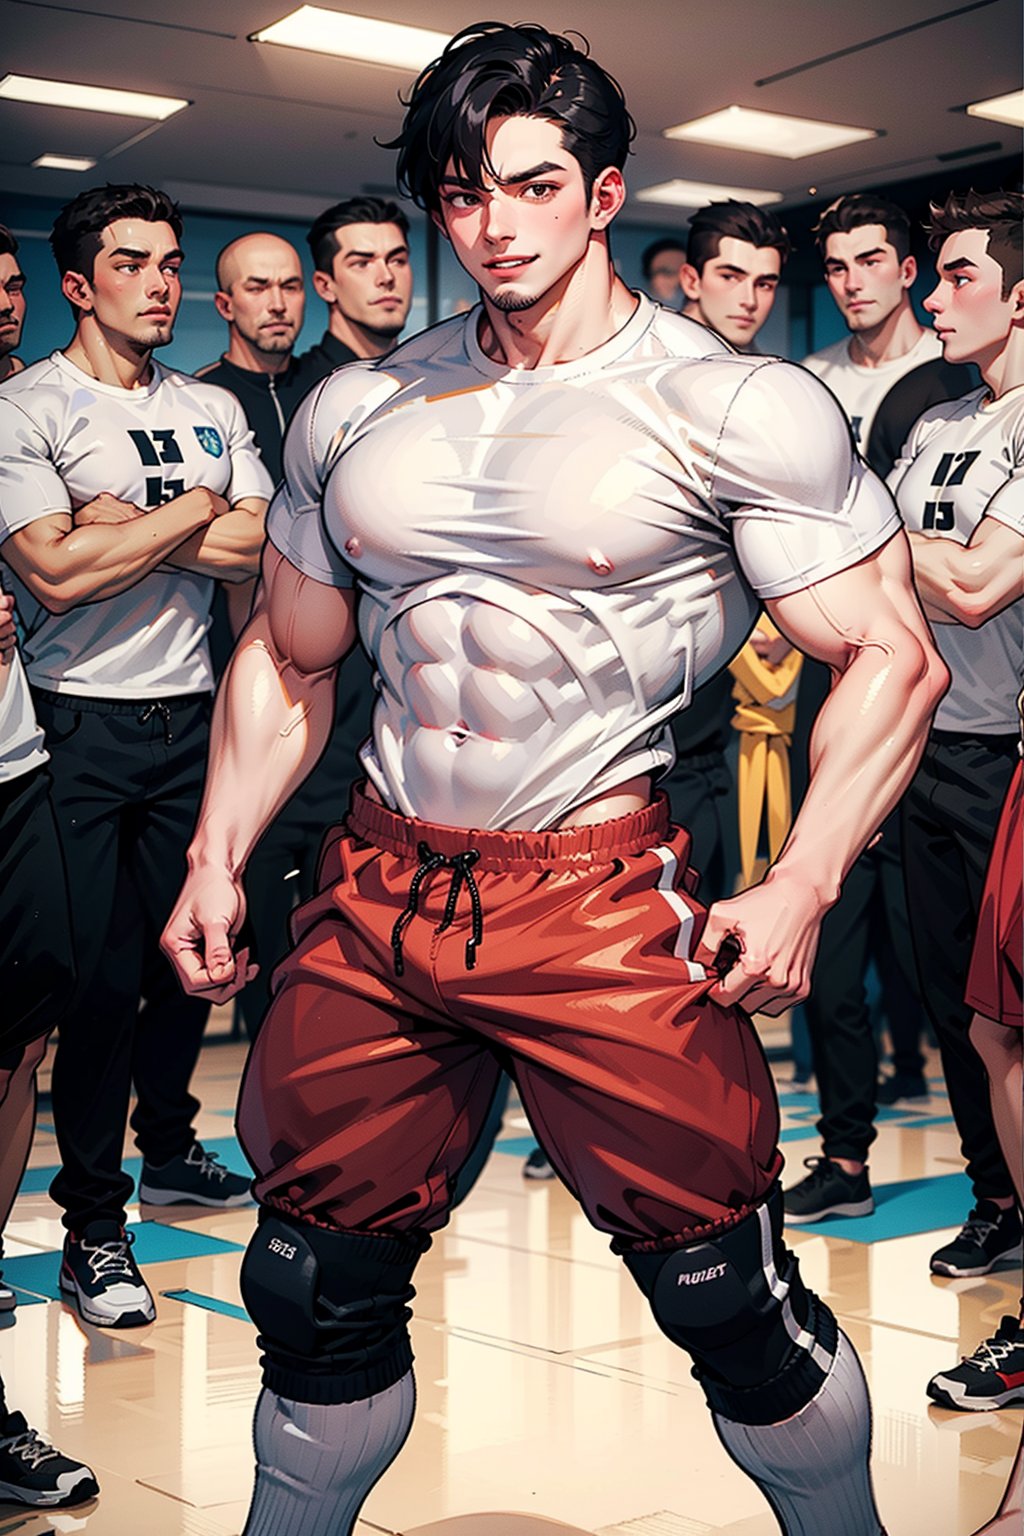 nervous, sweet-looking young man, clearly not a bodybuilder, struggles to lift a barbell twice his size in a crowded gym. A group of muscular bystanders, including a woman with a mischievous grin, offer him encouragement and helpful pointers.